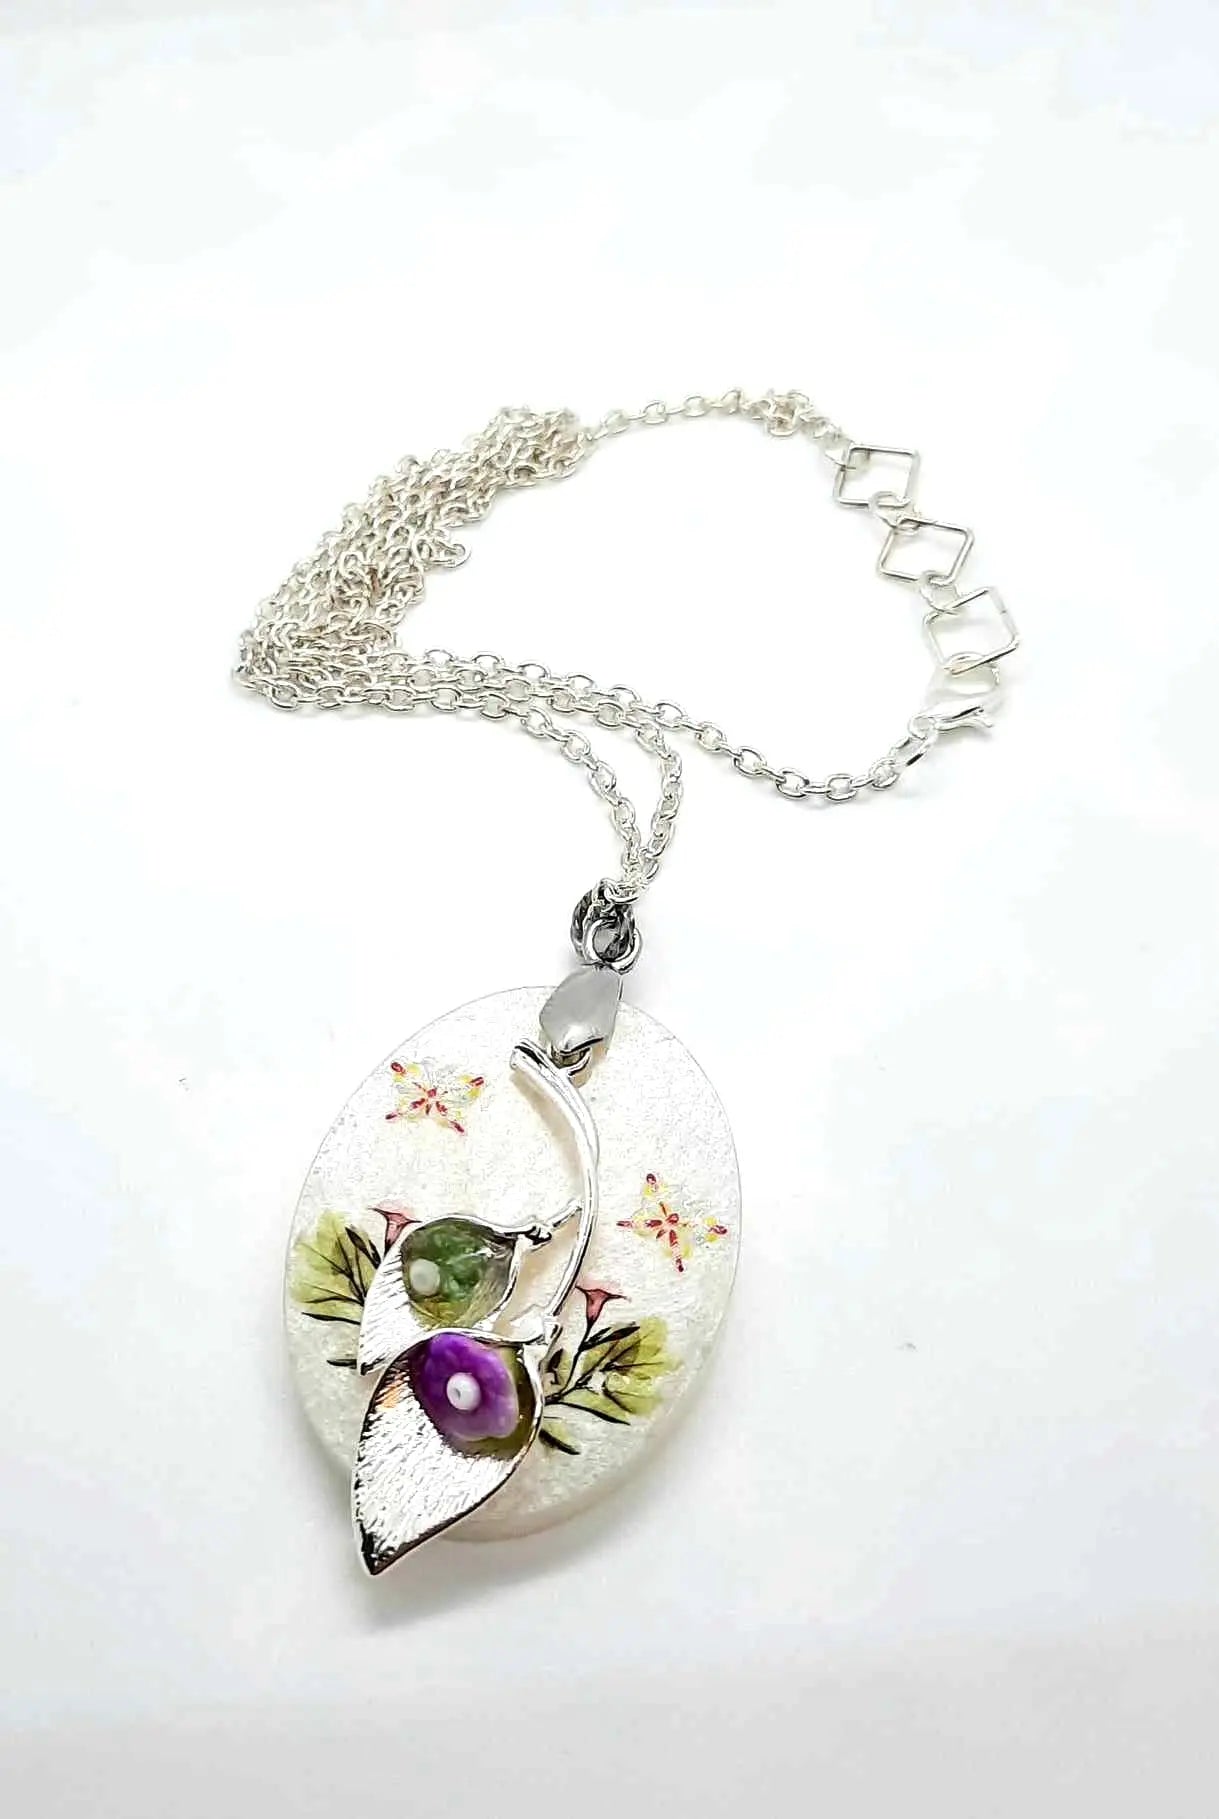 Resined white with flowers Necklace - Image #2